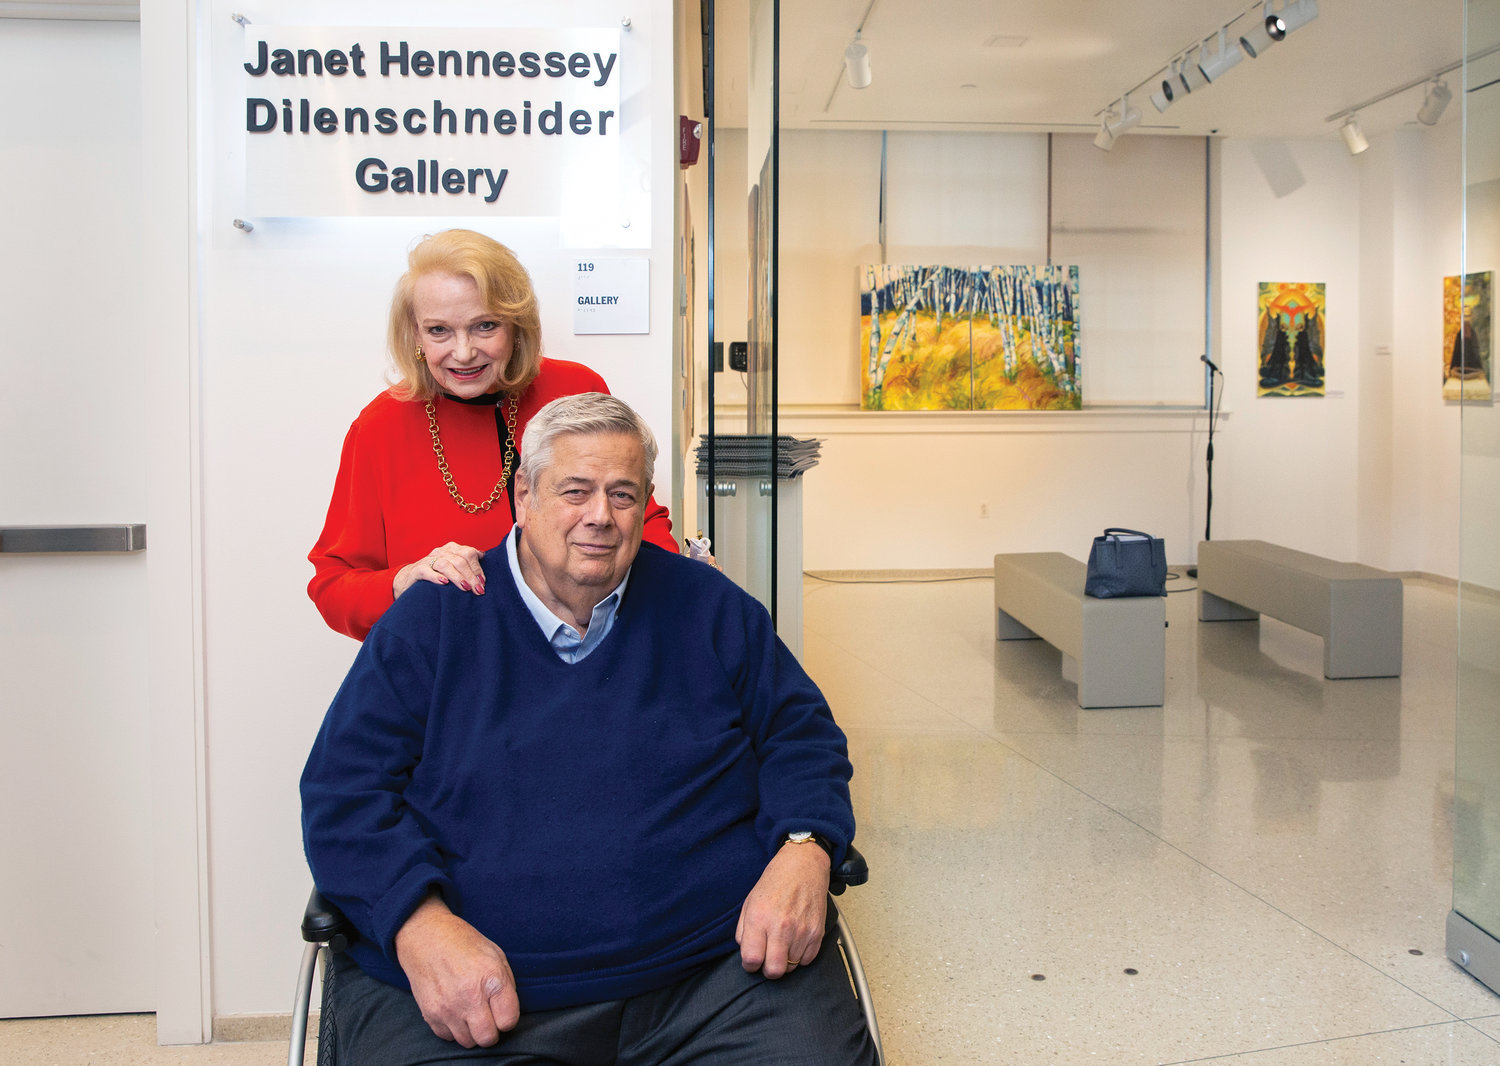 Cardinal Dolan blessed the new Janet Hennessey Dilenschneider Gallery at the Sheen Center for Thought and Culture in lower Manhattan April 5. Ms. Dilenschneider is a Connecticut-based artist and philanthropist. She and her husband, Bob, are longtime patrons of the Sheen Center and supporters of the archdiocese. Their recent gift will further the Sheen Center’s mission to provide a haven for the arts, and a platform for conversations about diverse and inclusive aspects of humanity through the lens of faith and respect.